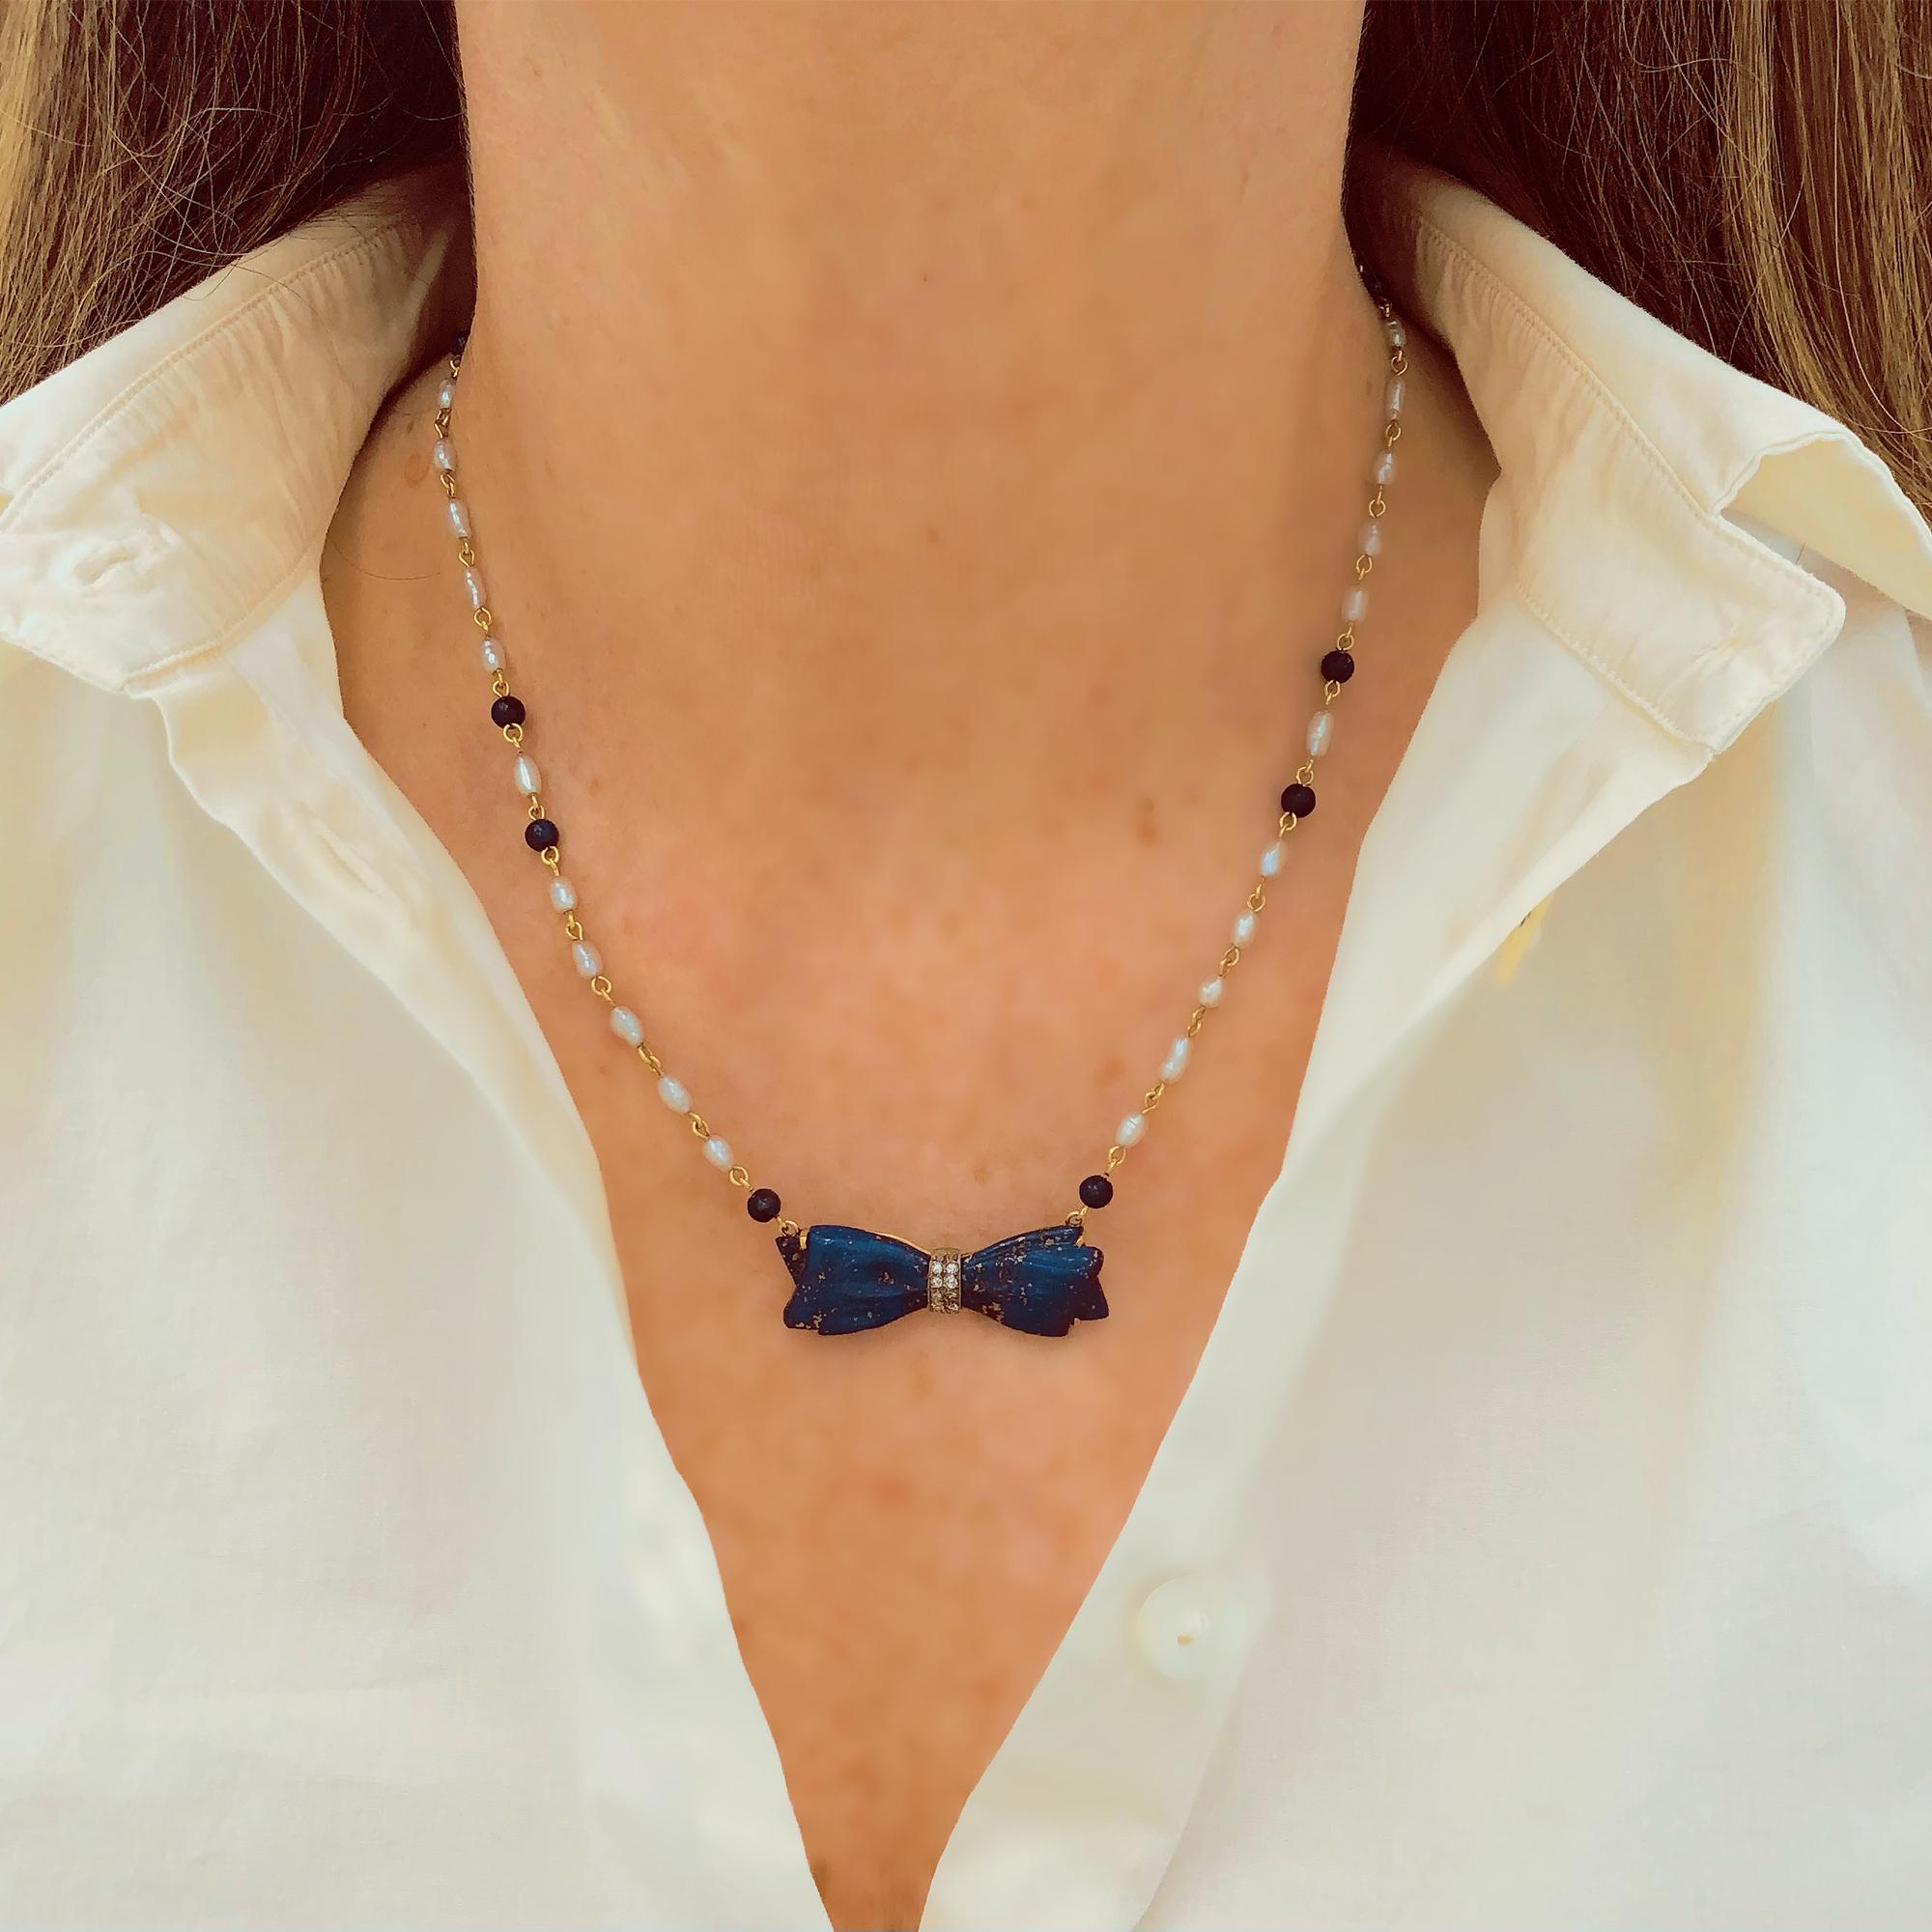 Antique Lapis Lazuli Bow Necklace with Pearls in Yellow Gold In Excellent Condition For Sale In Miami, FL